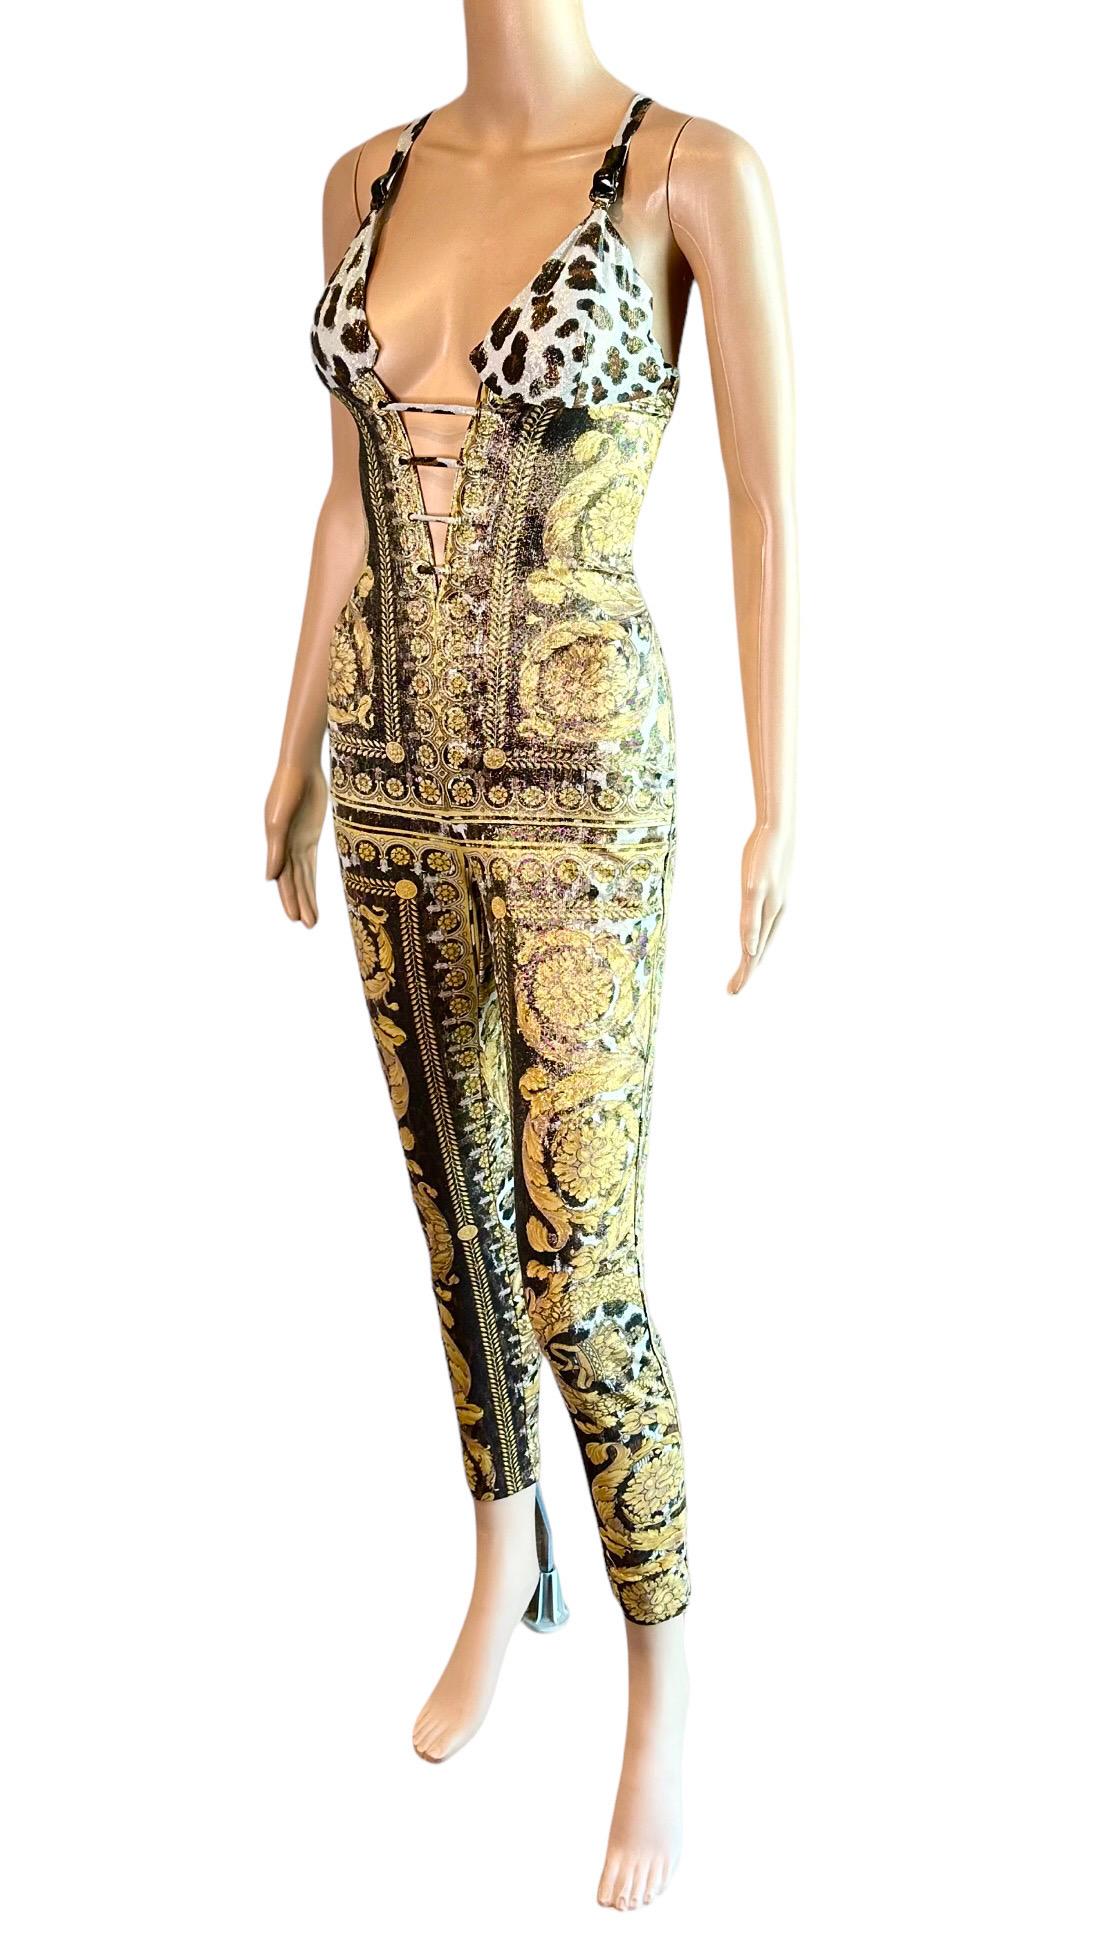 Gianni Versace S/S 1992 Runway Bustier Embellished Baroque Catsuit Jumpsuit For Sale 5